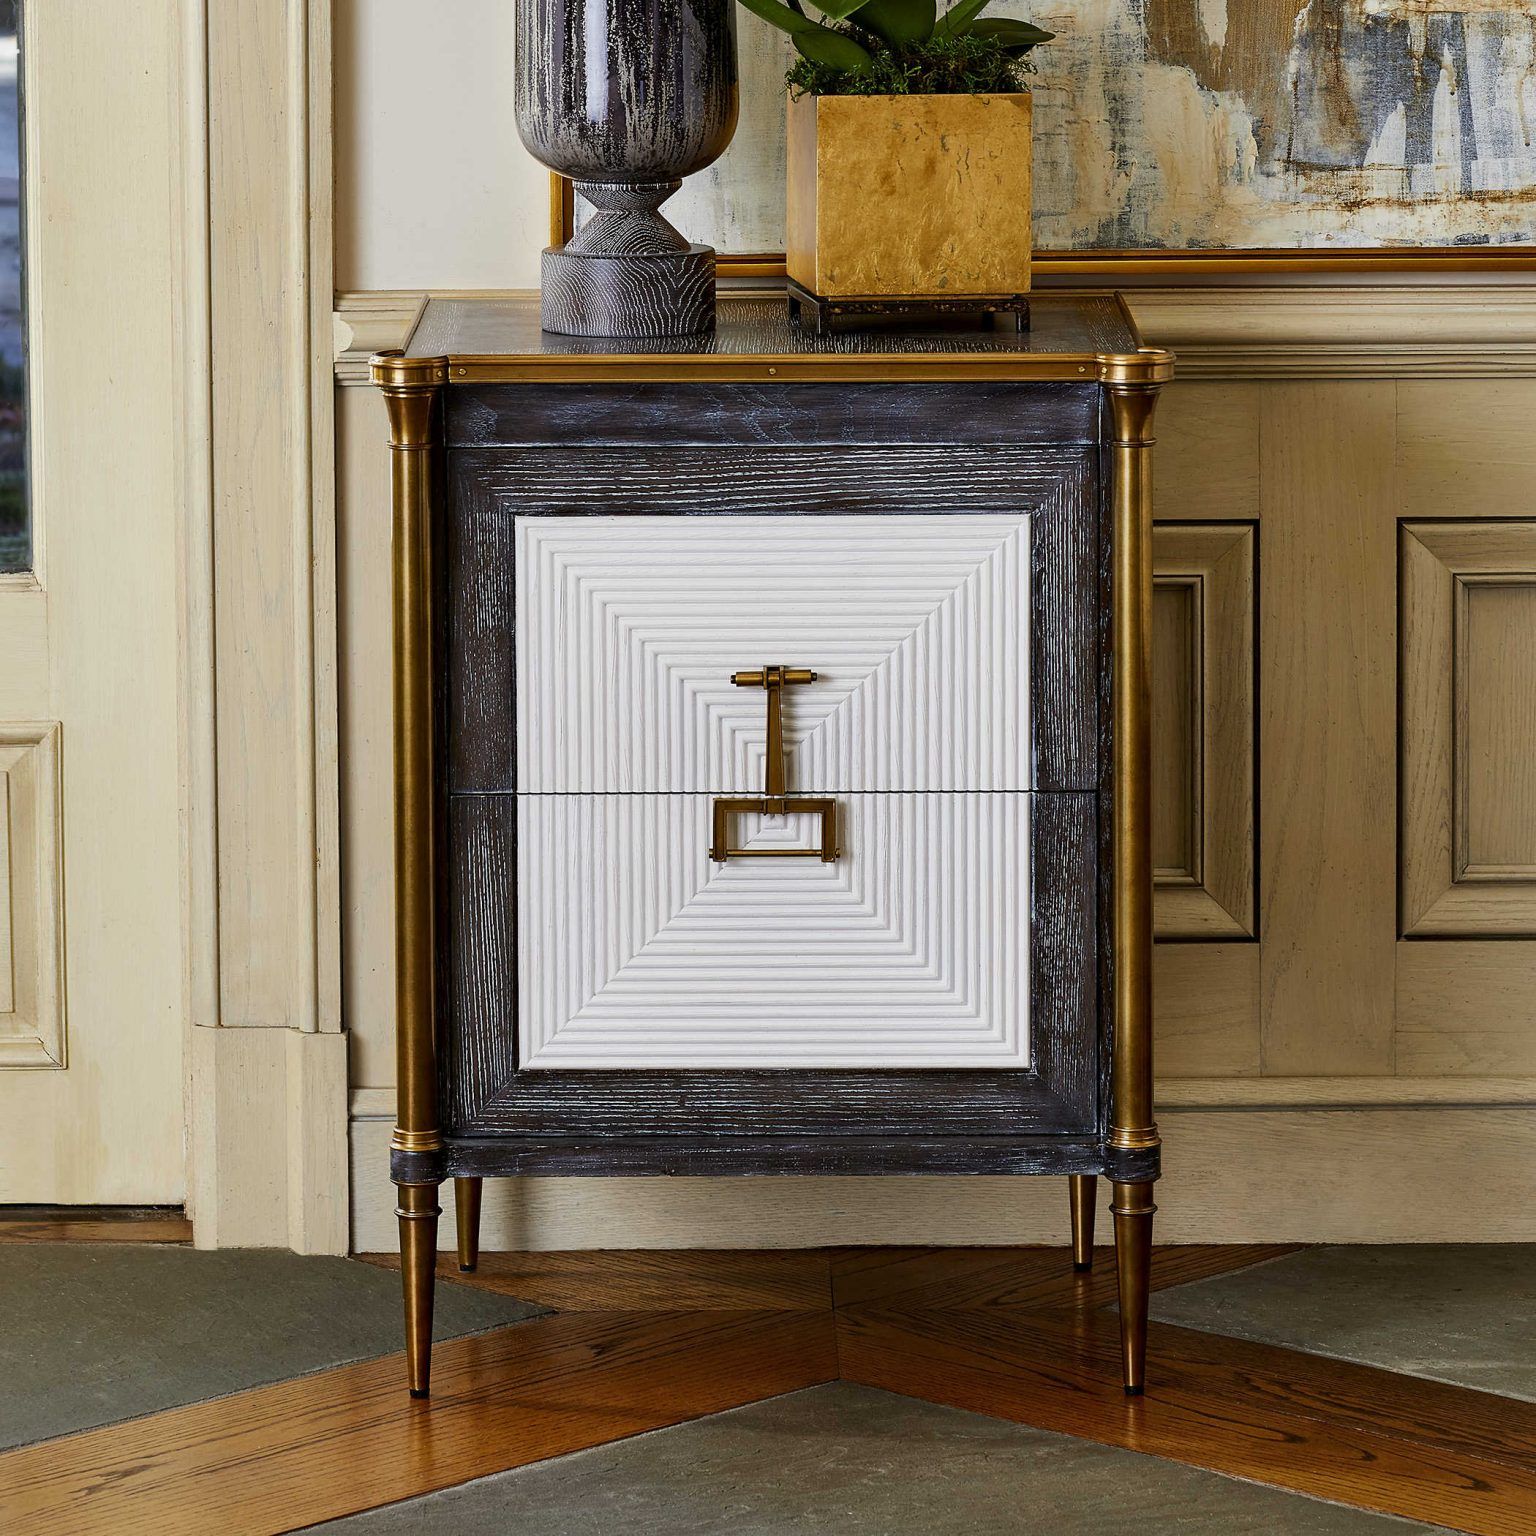 Antique-looking side table with gold and white detailing is granny chic